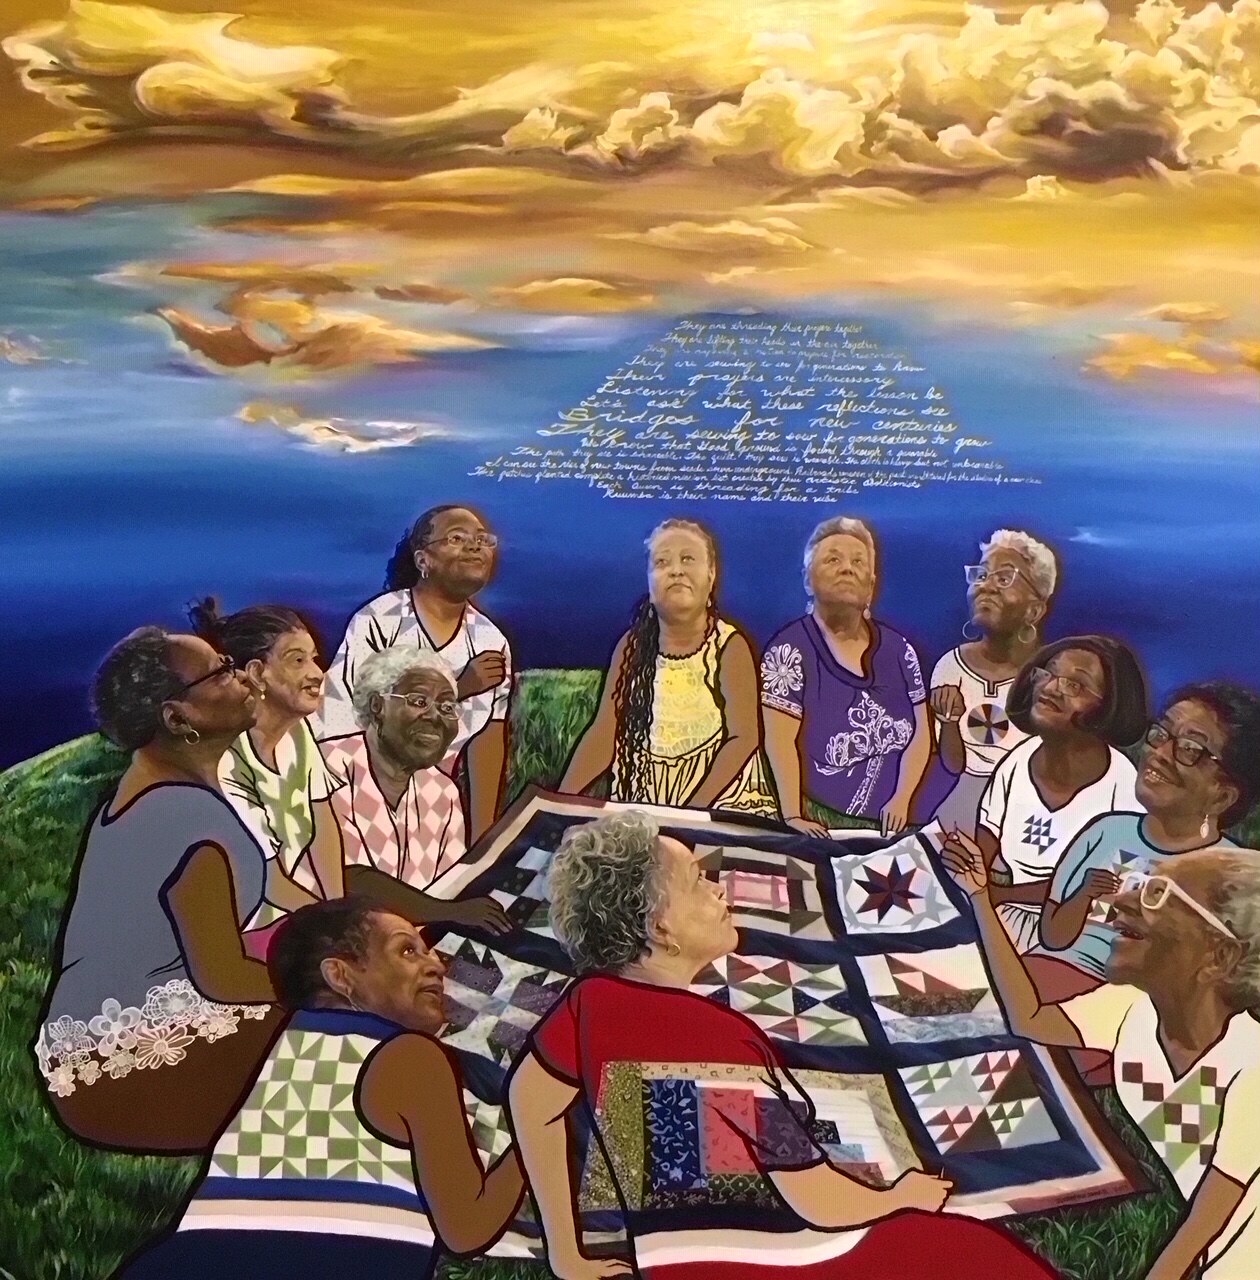 Painting of a group of women sitting around a quilt on the grass and looking up at sky filled with clouds and words